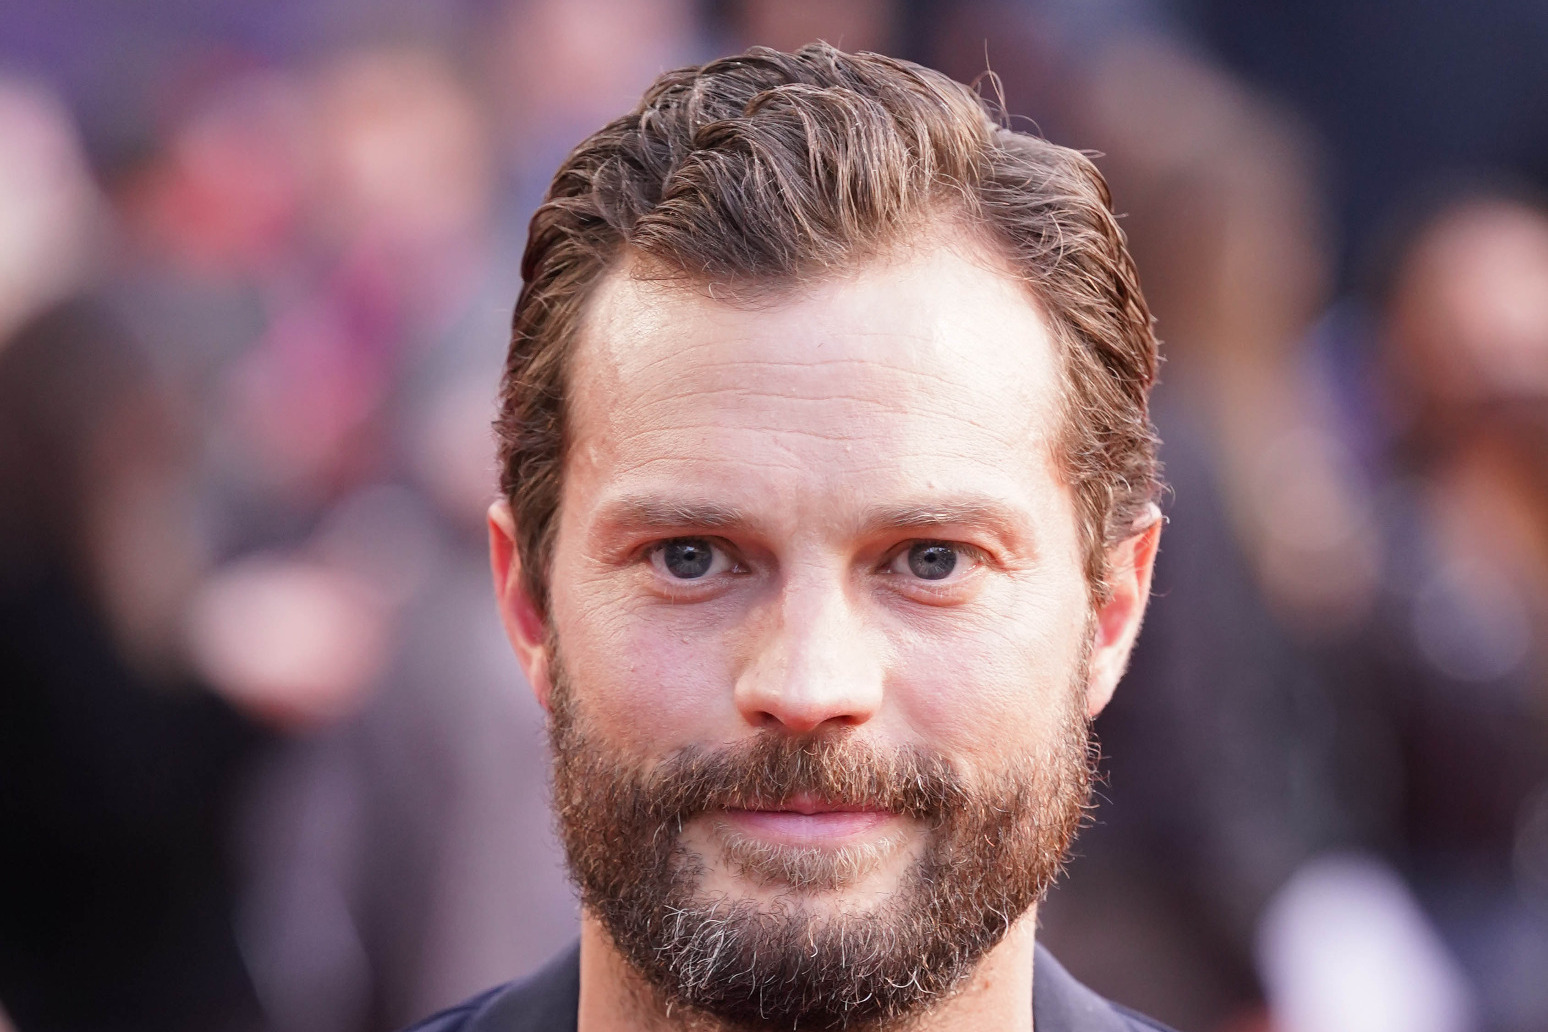 Jamie Dornan says he moved to Hollywood hoping to star in comedies thumbnail